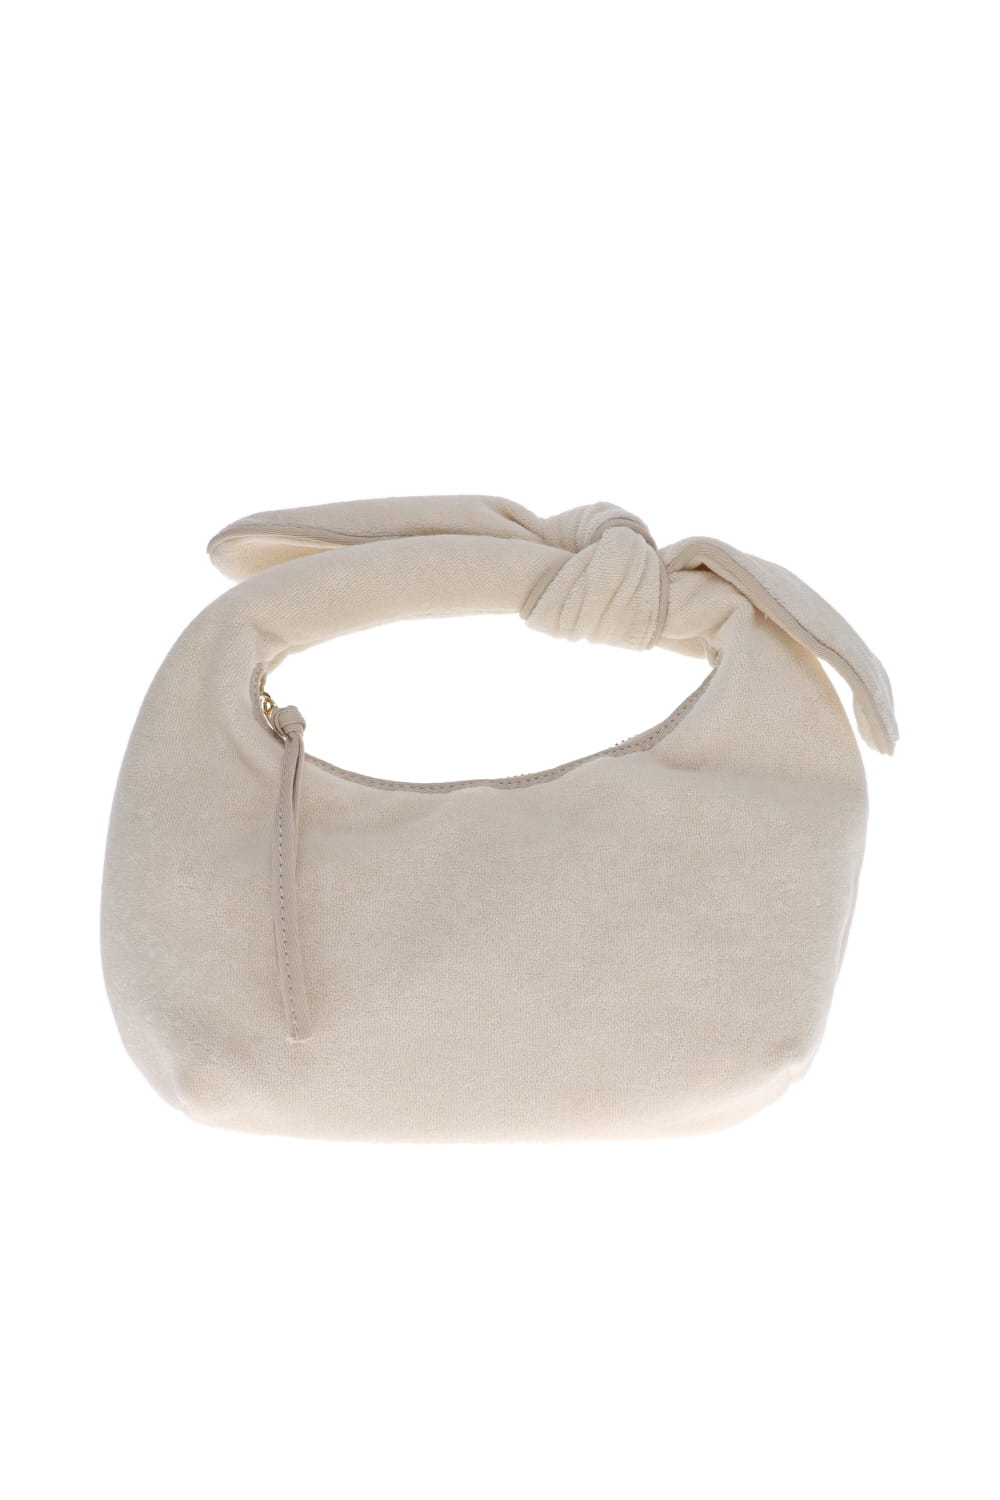 POOLSIDE The Josie Knot Ivory Terry Top Handle Bag